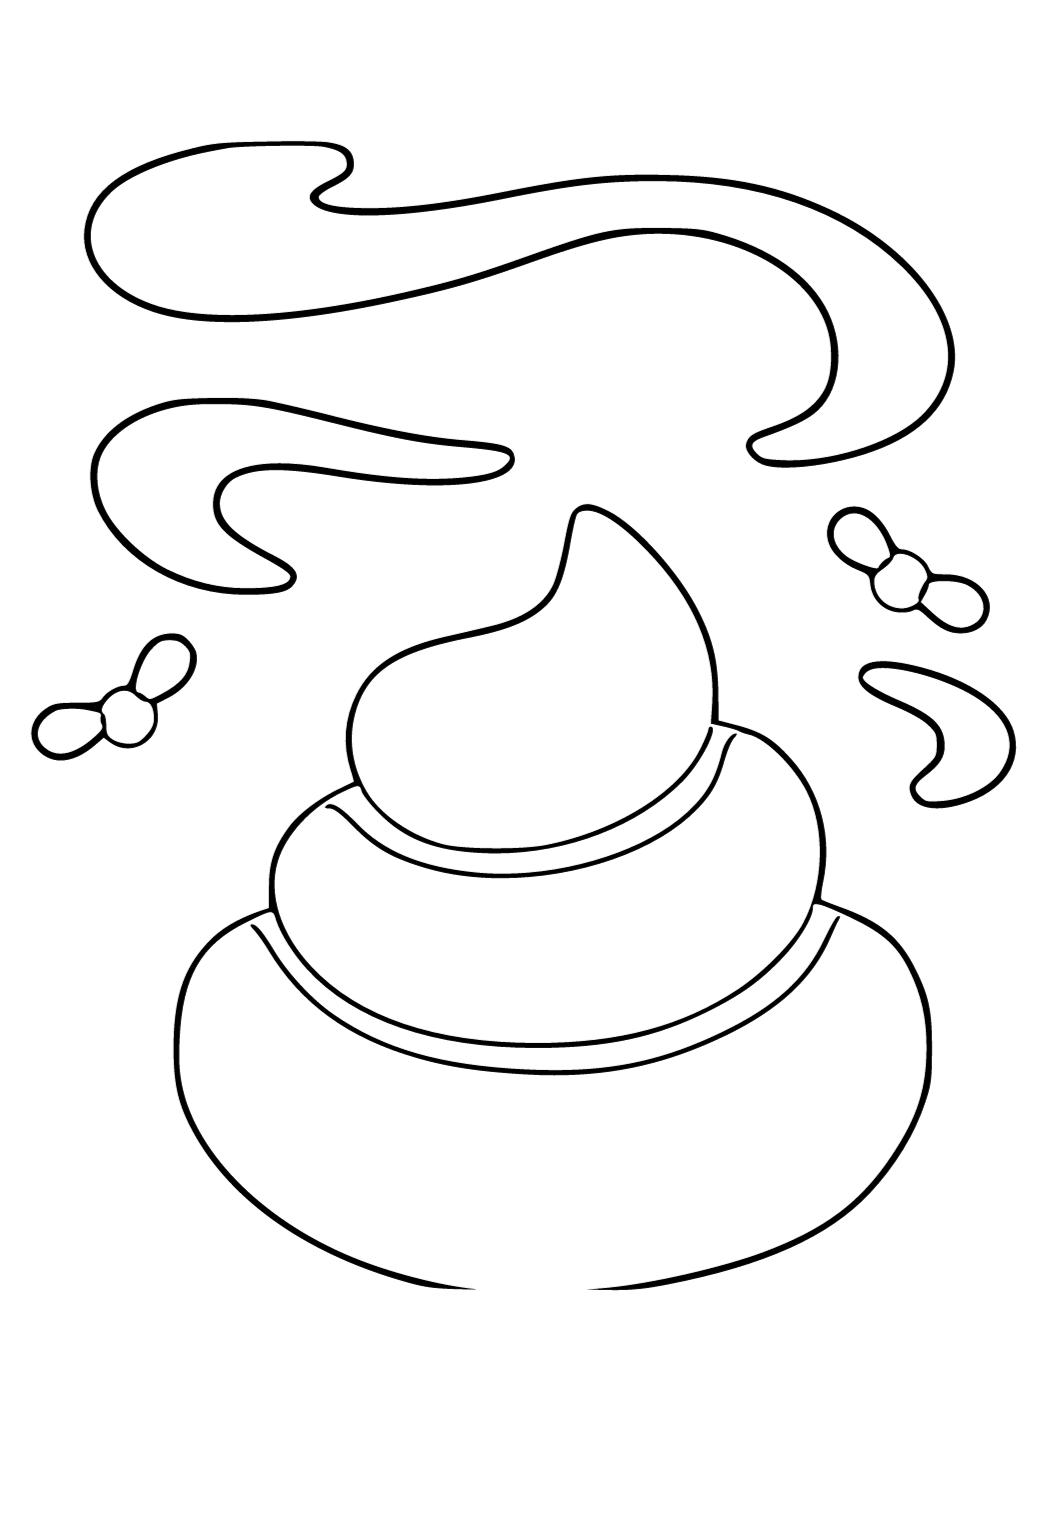 Free printable poop easy coloring page for adults and kids